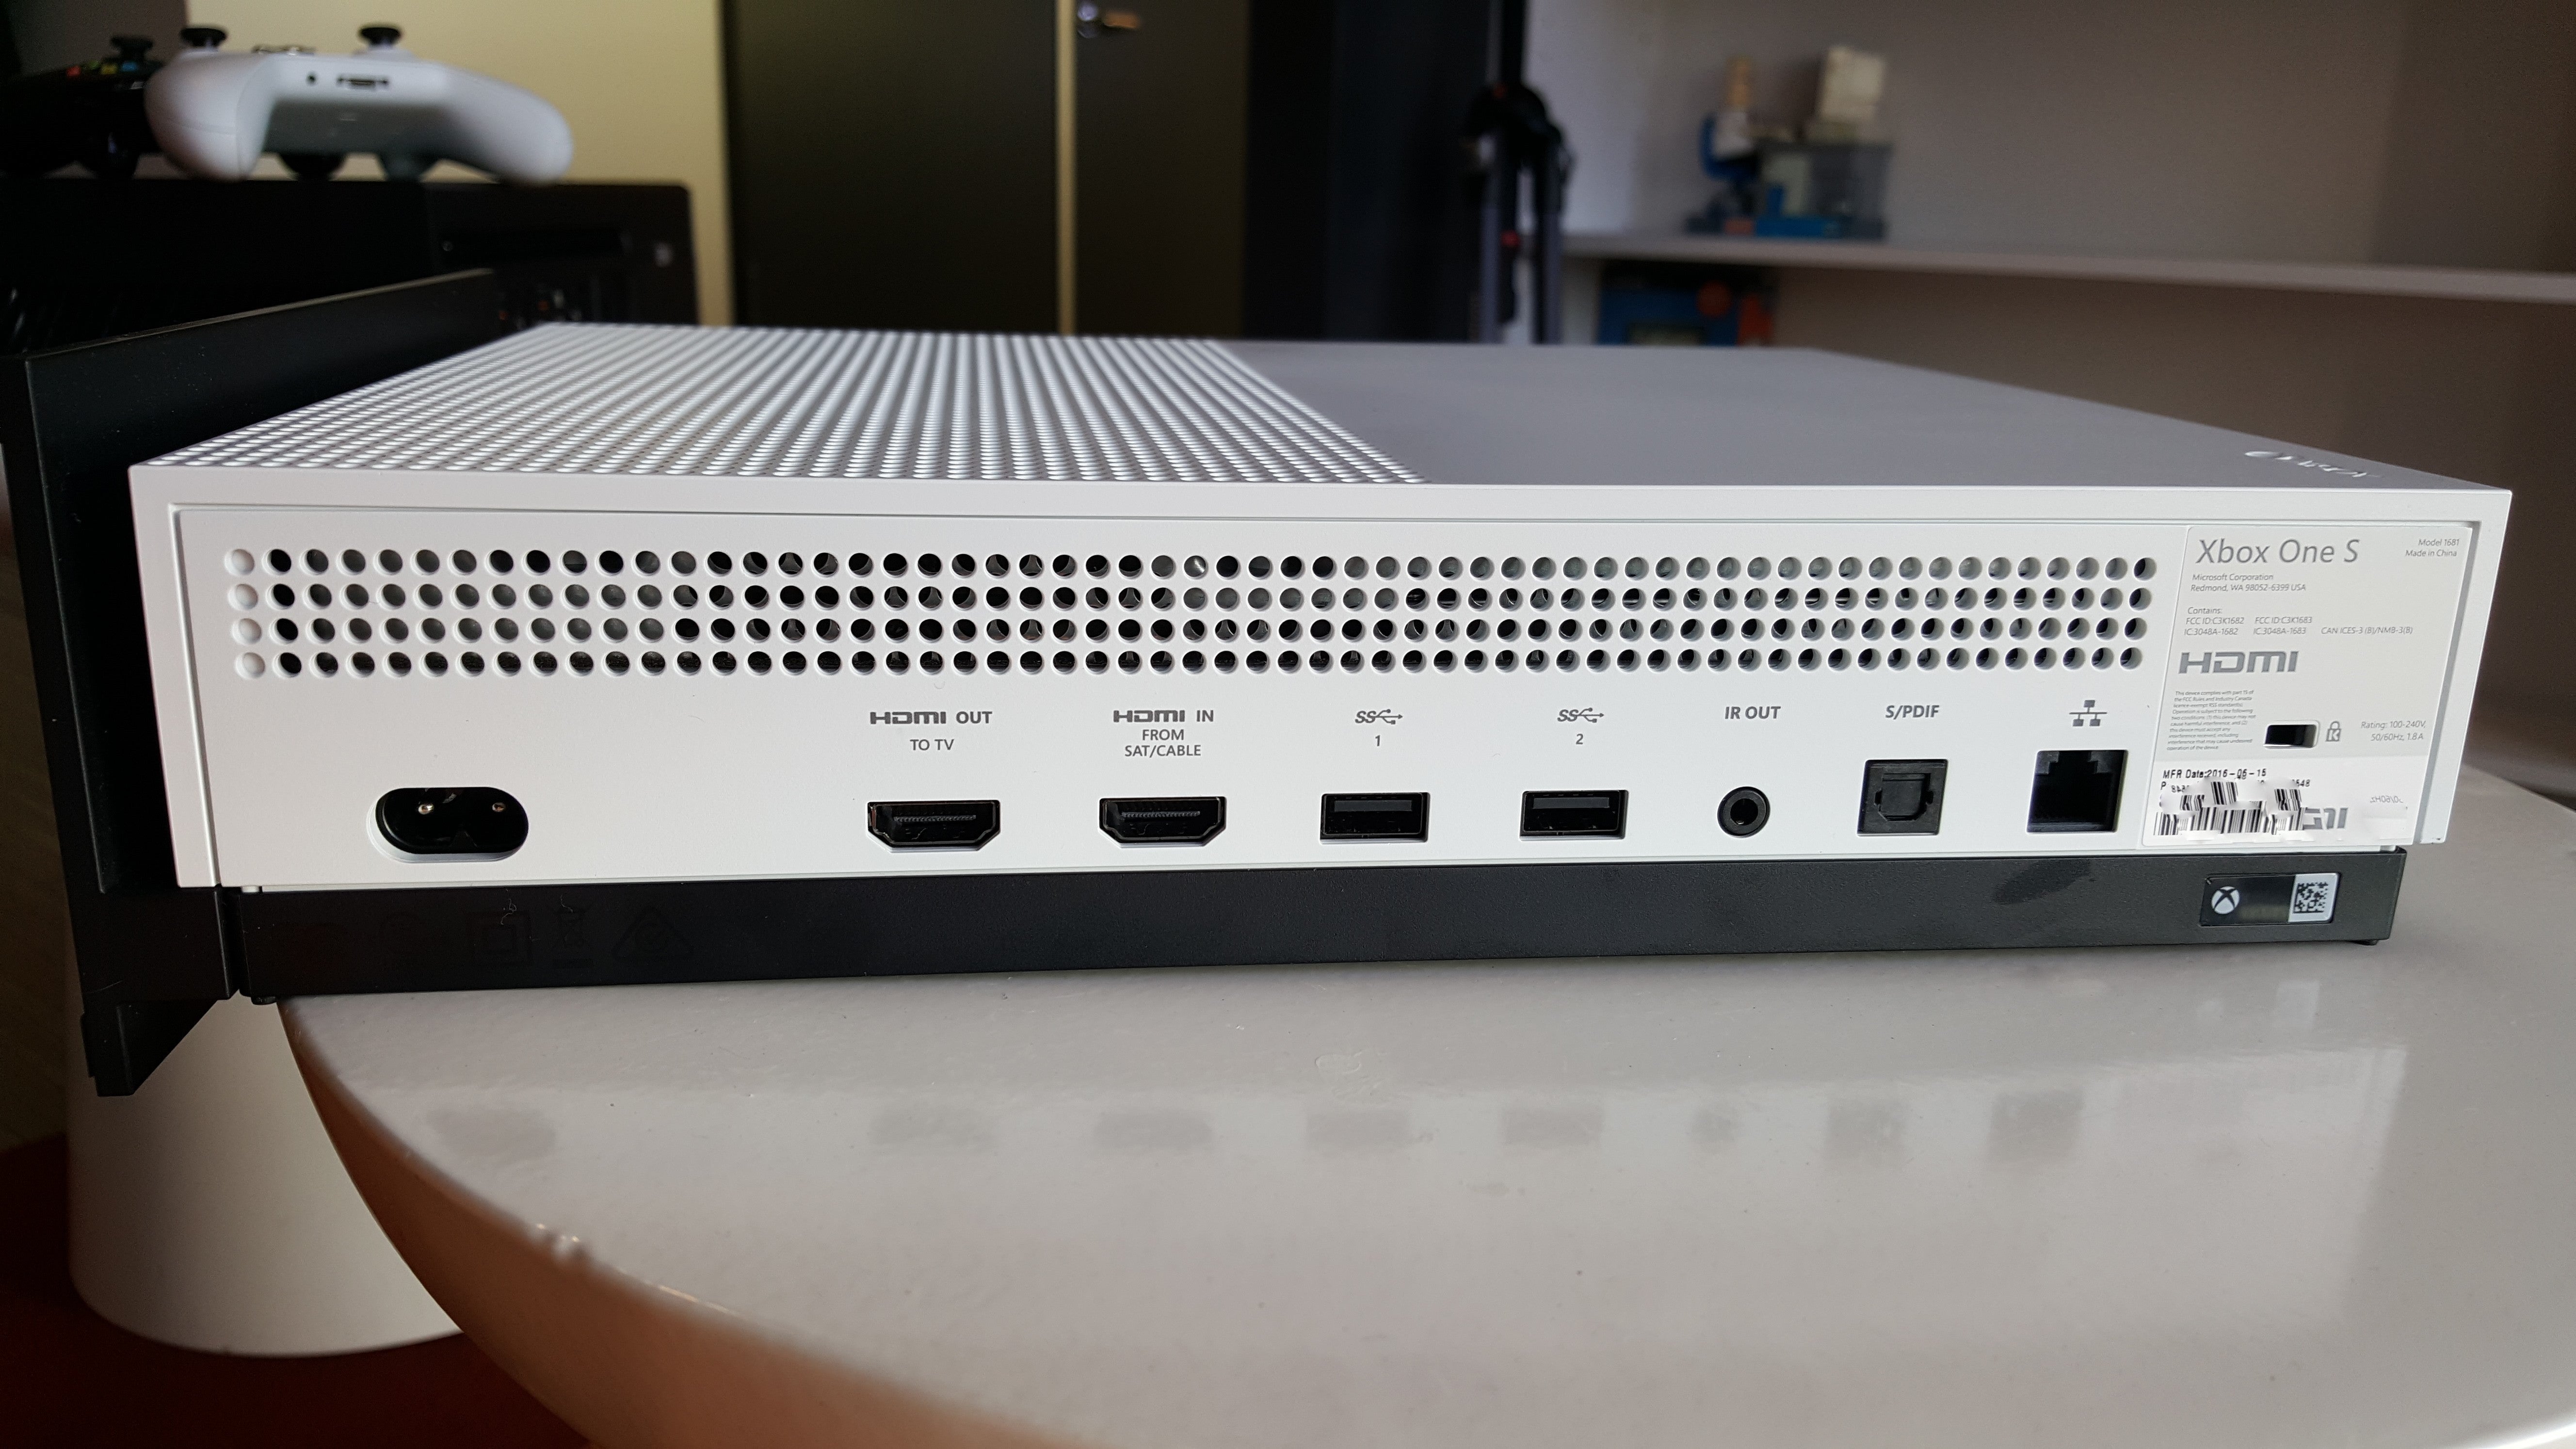 Beknopt rook Typisch Xbox One S review: A great Ultra HD Blu-ray player for gamers | TechHive